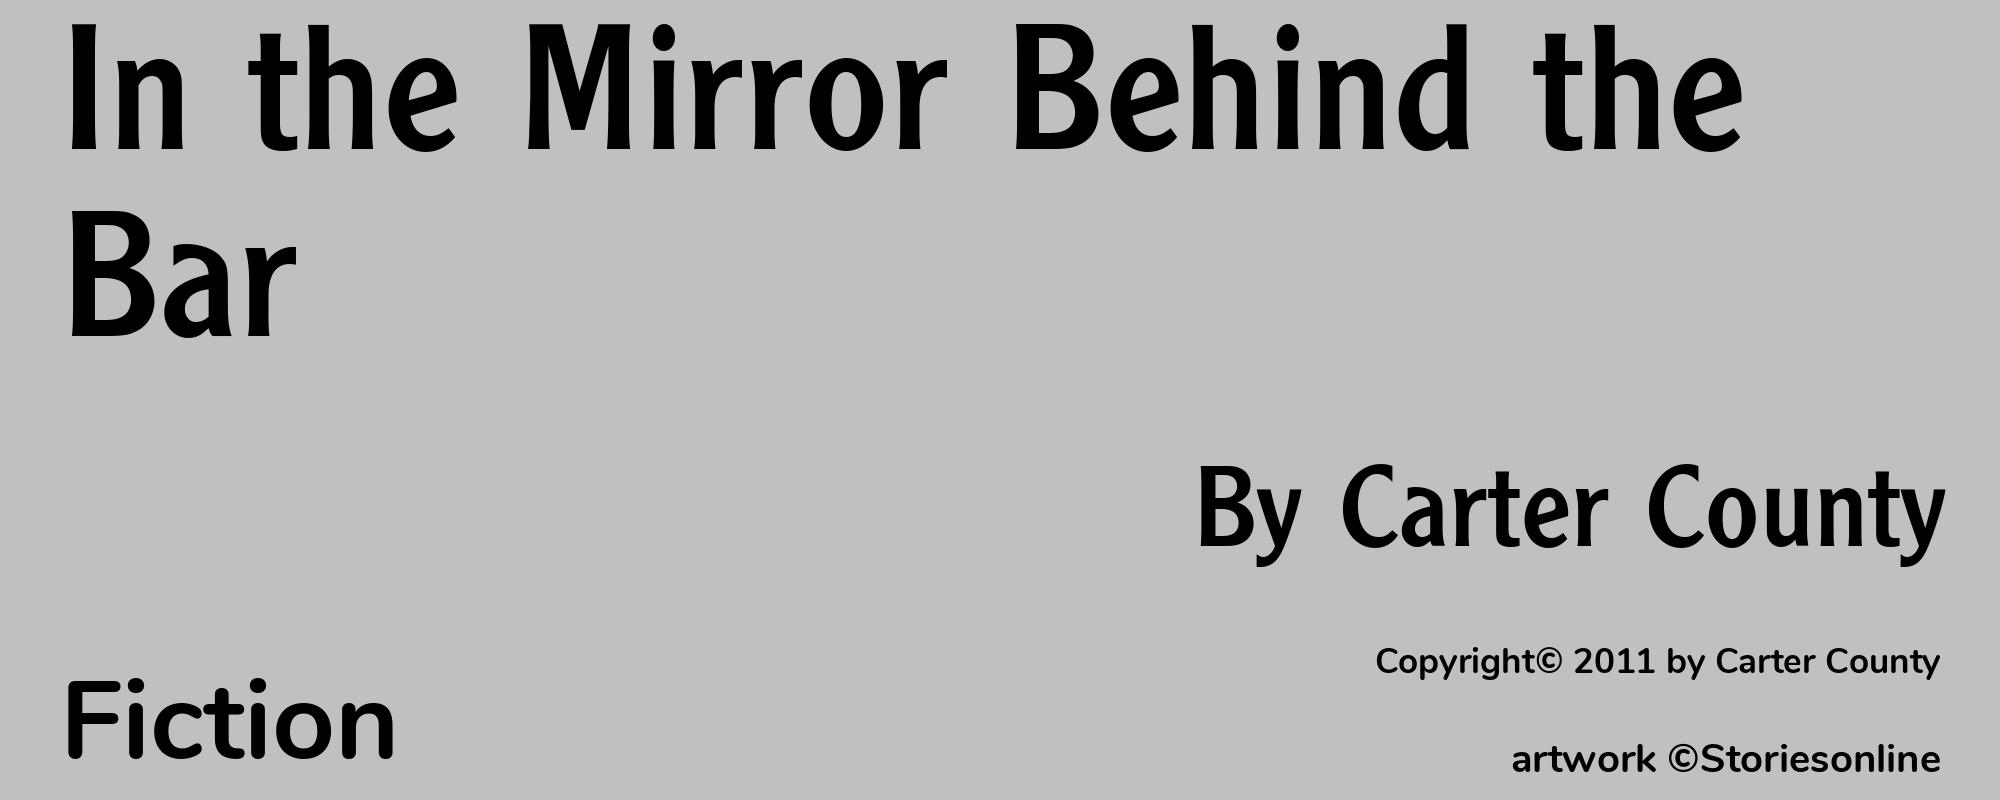 In the Mirror Behind the Bar - Cover